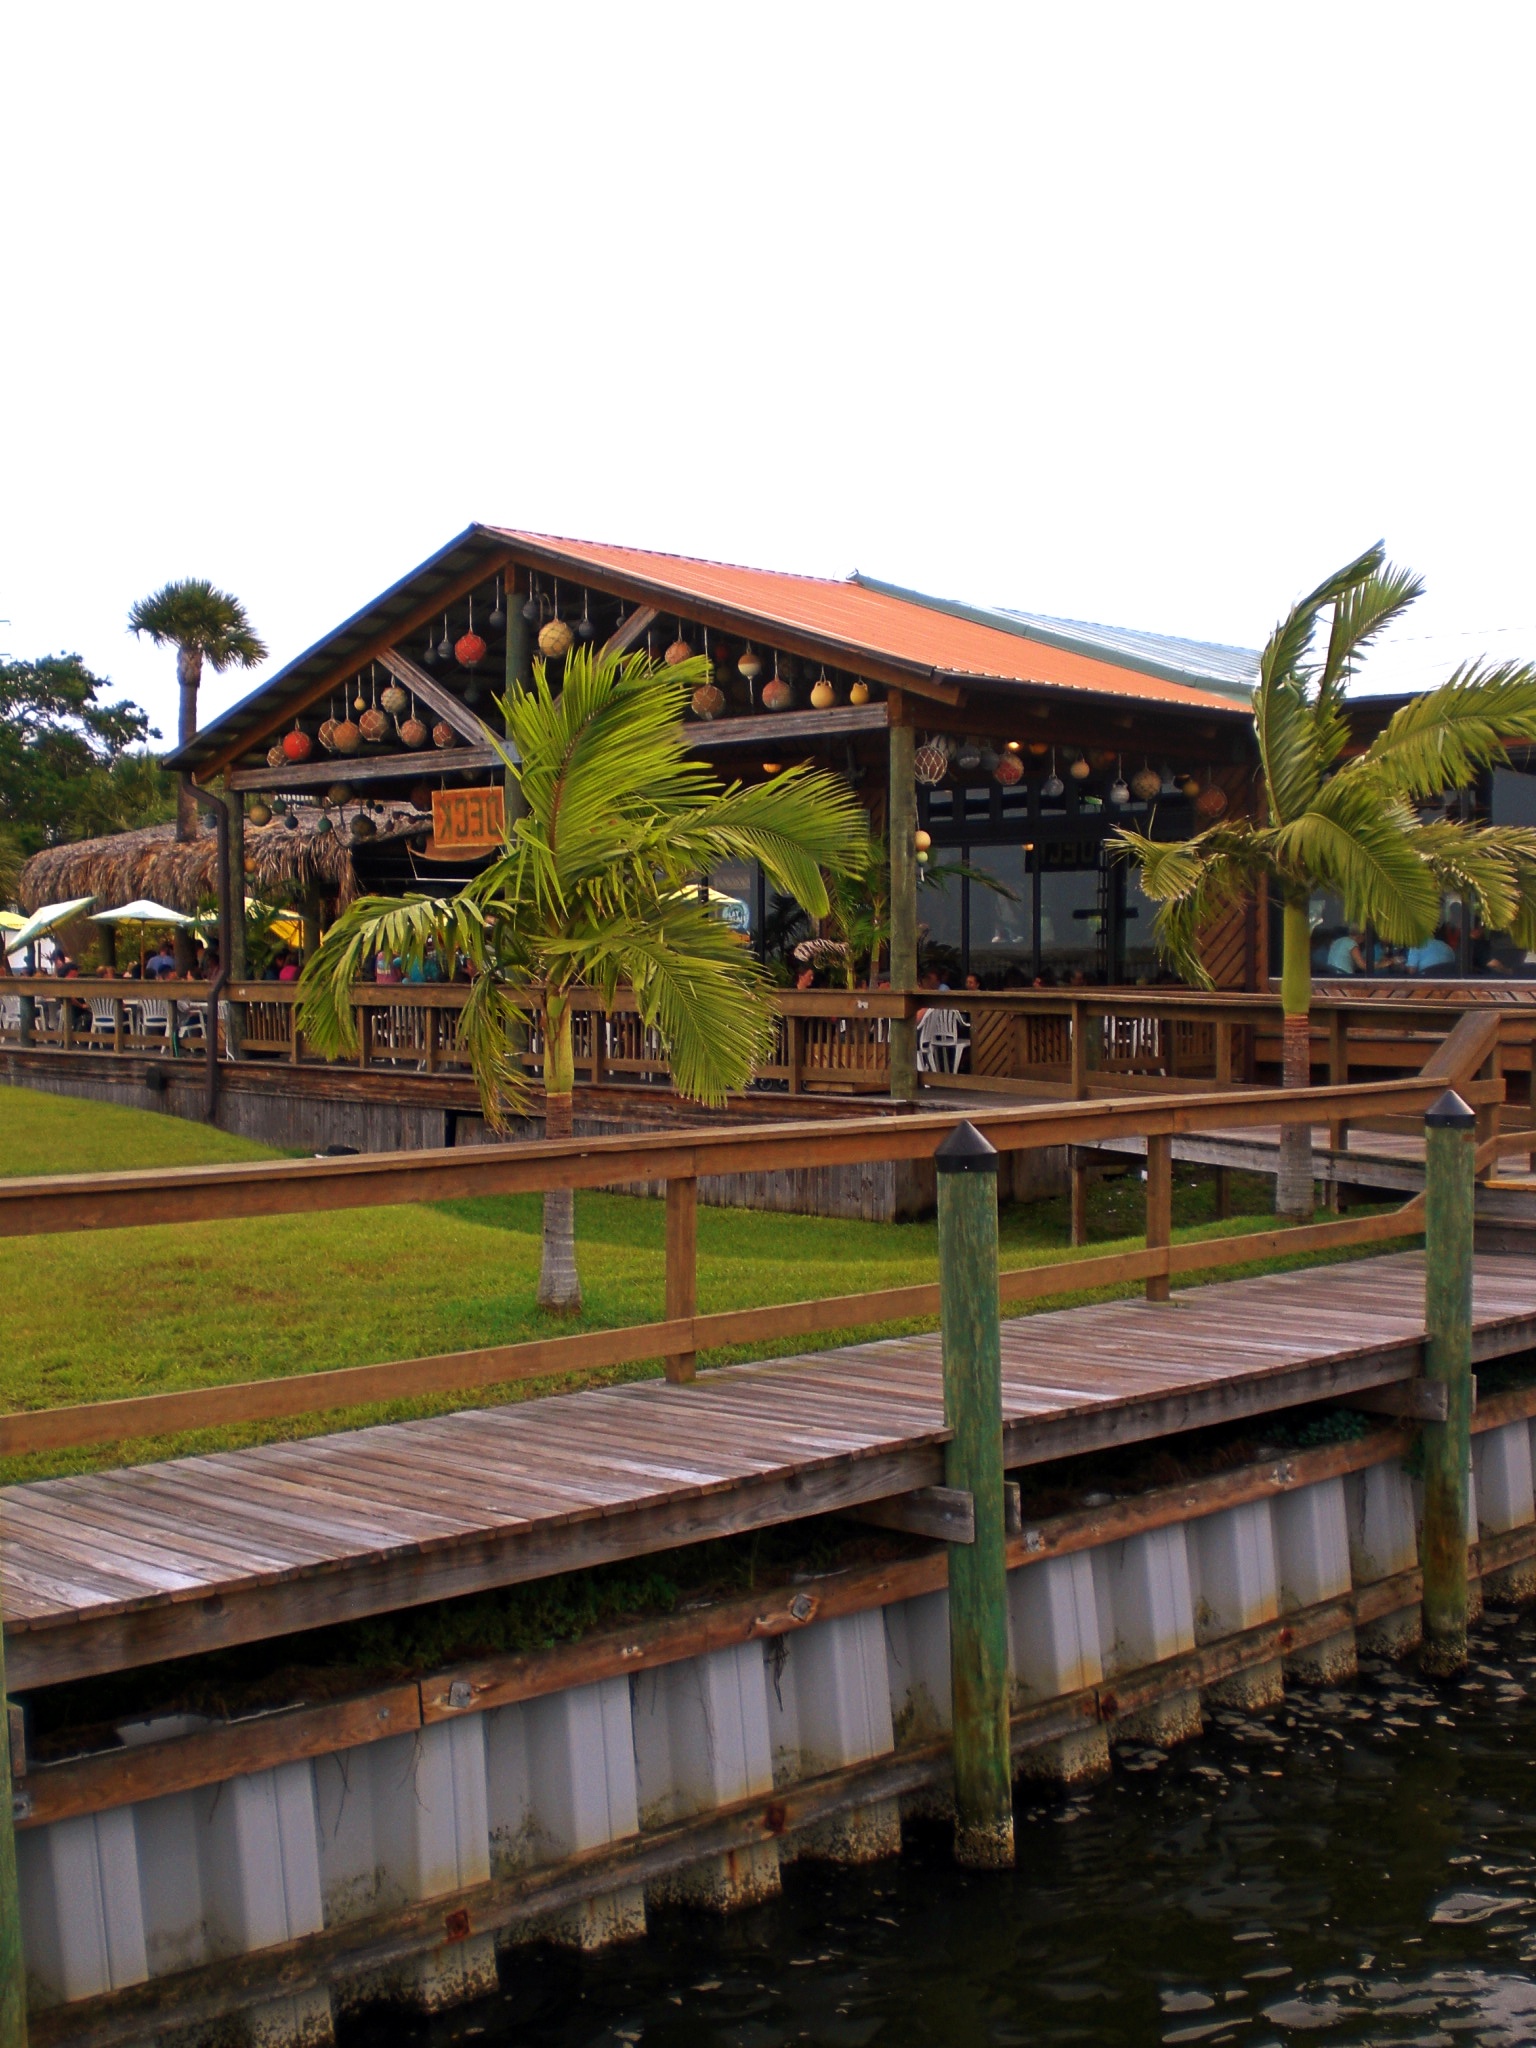 Grills restaurant in Melbourne, Florida as seen from the Indian River.